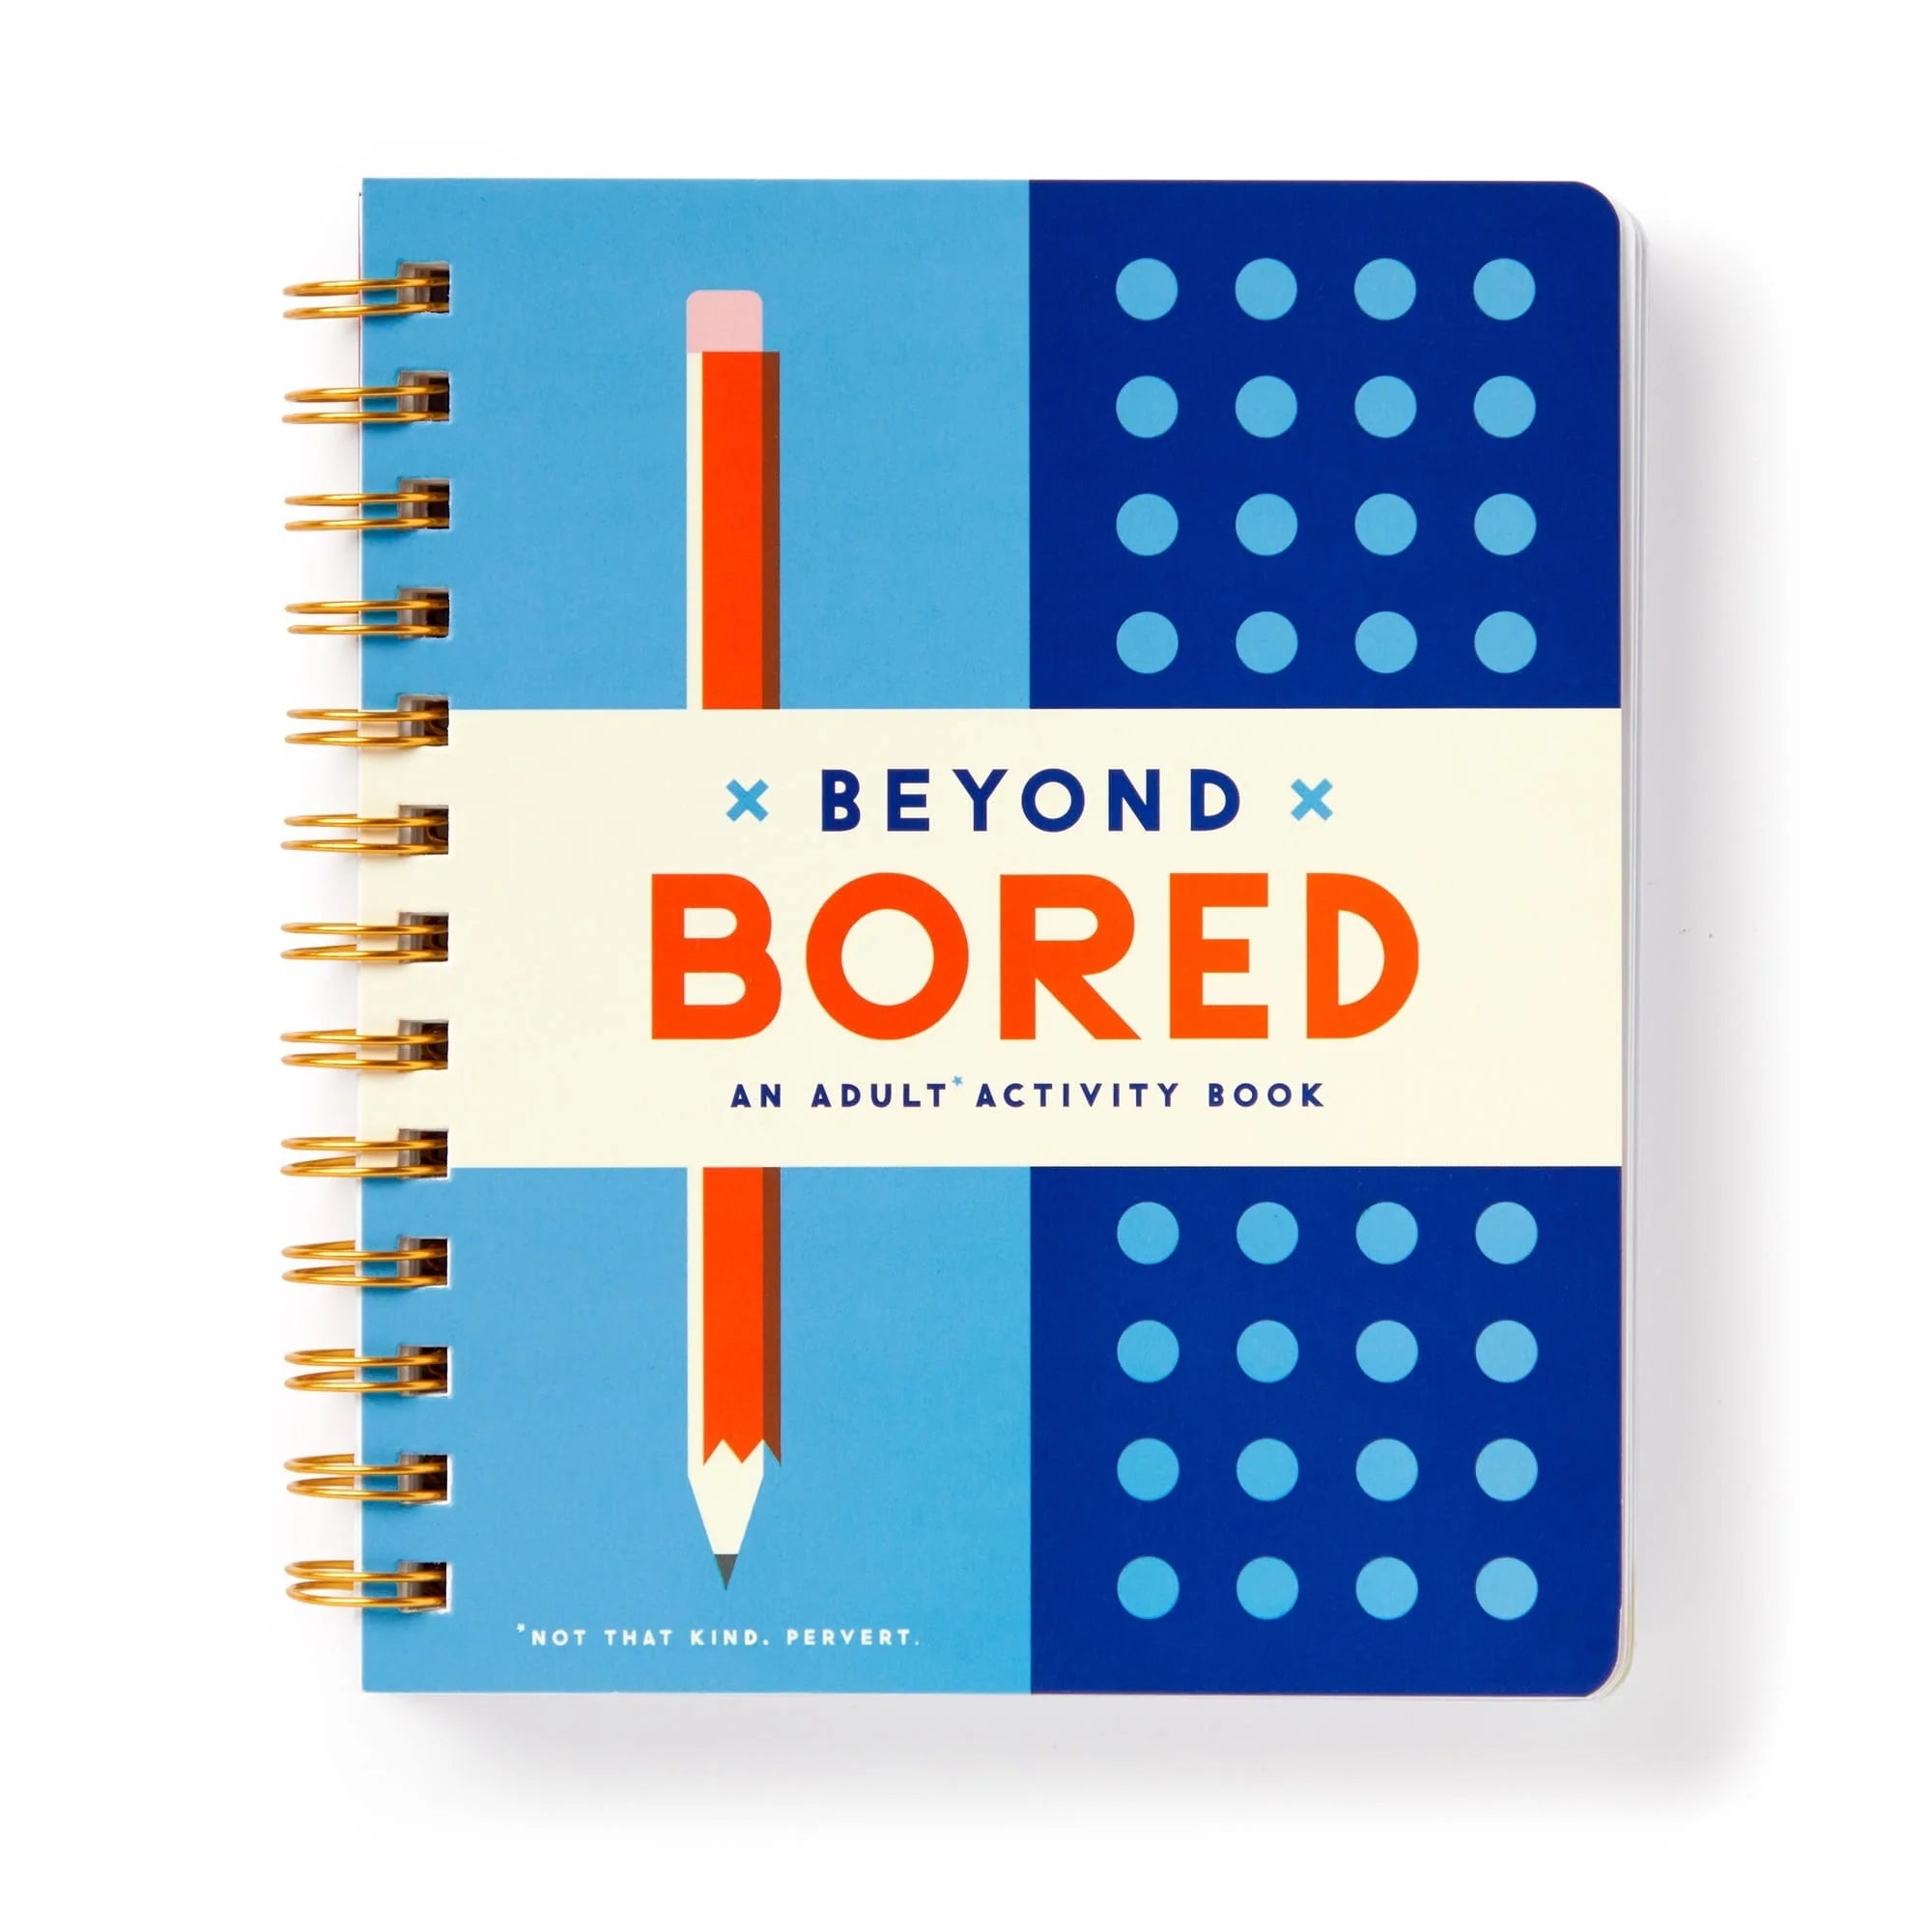 Beyond Bored Adult Activity Book by penny black